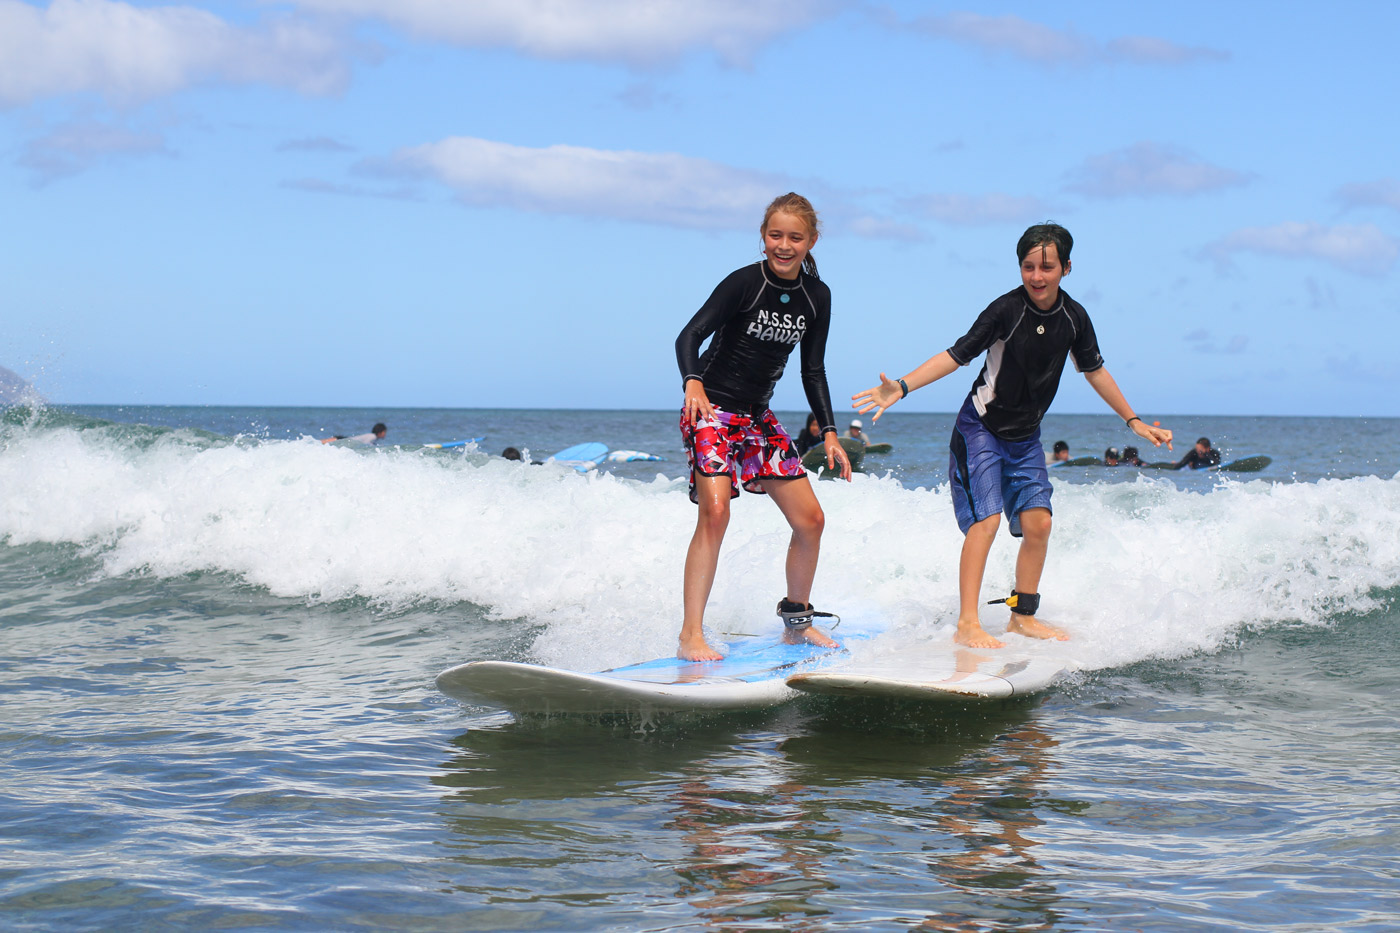 Learning to surf and share waves